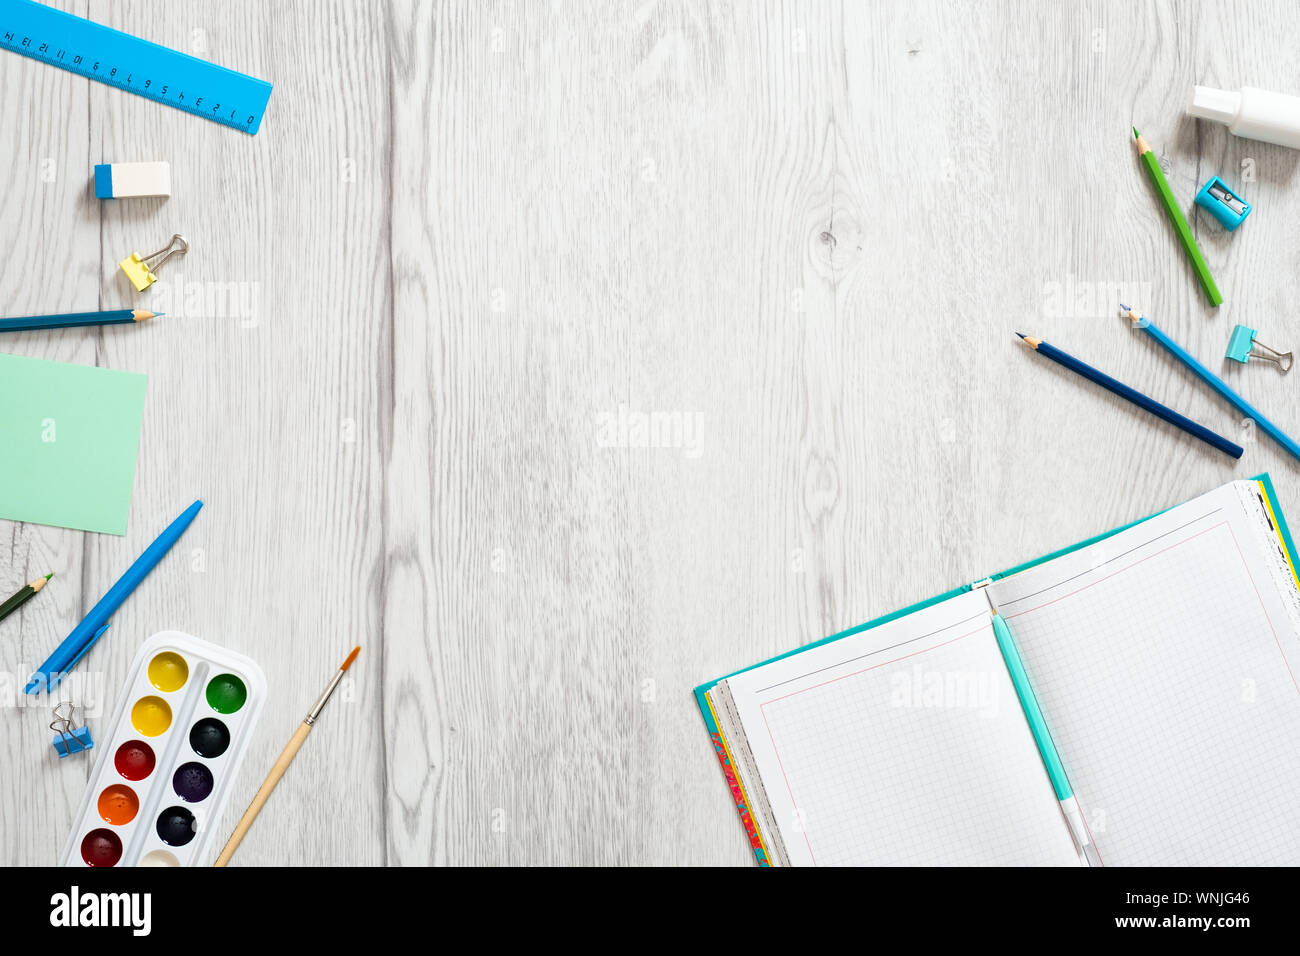 School notebook and various stationery on wooden background. Back to school  concept. Flat lay, top view, overhead Stock Photo - Alamy